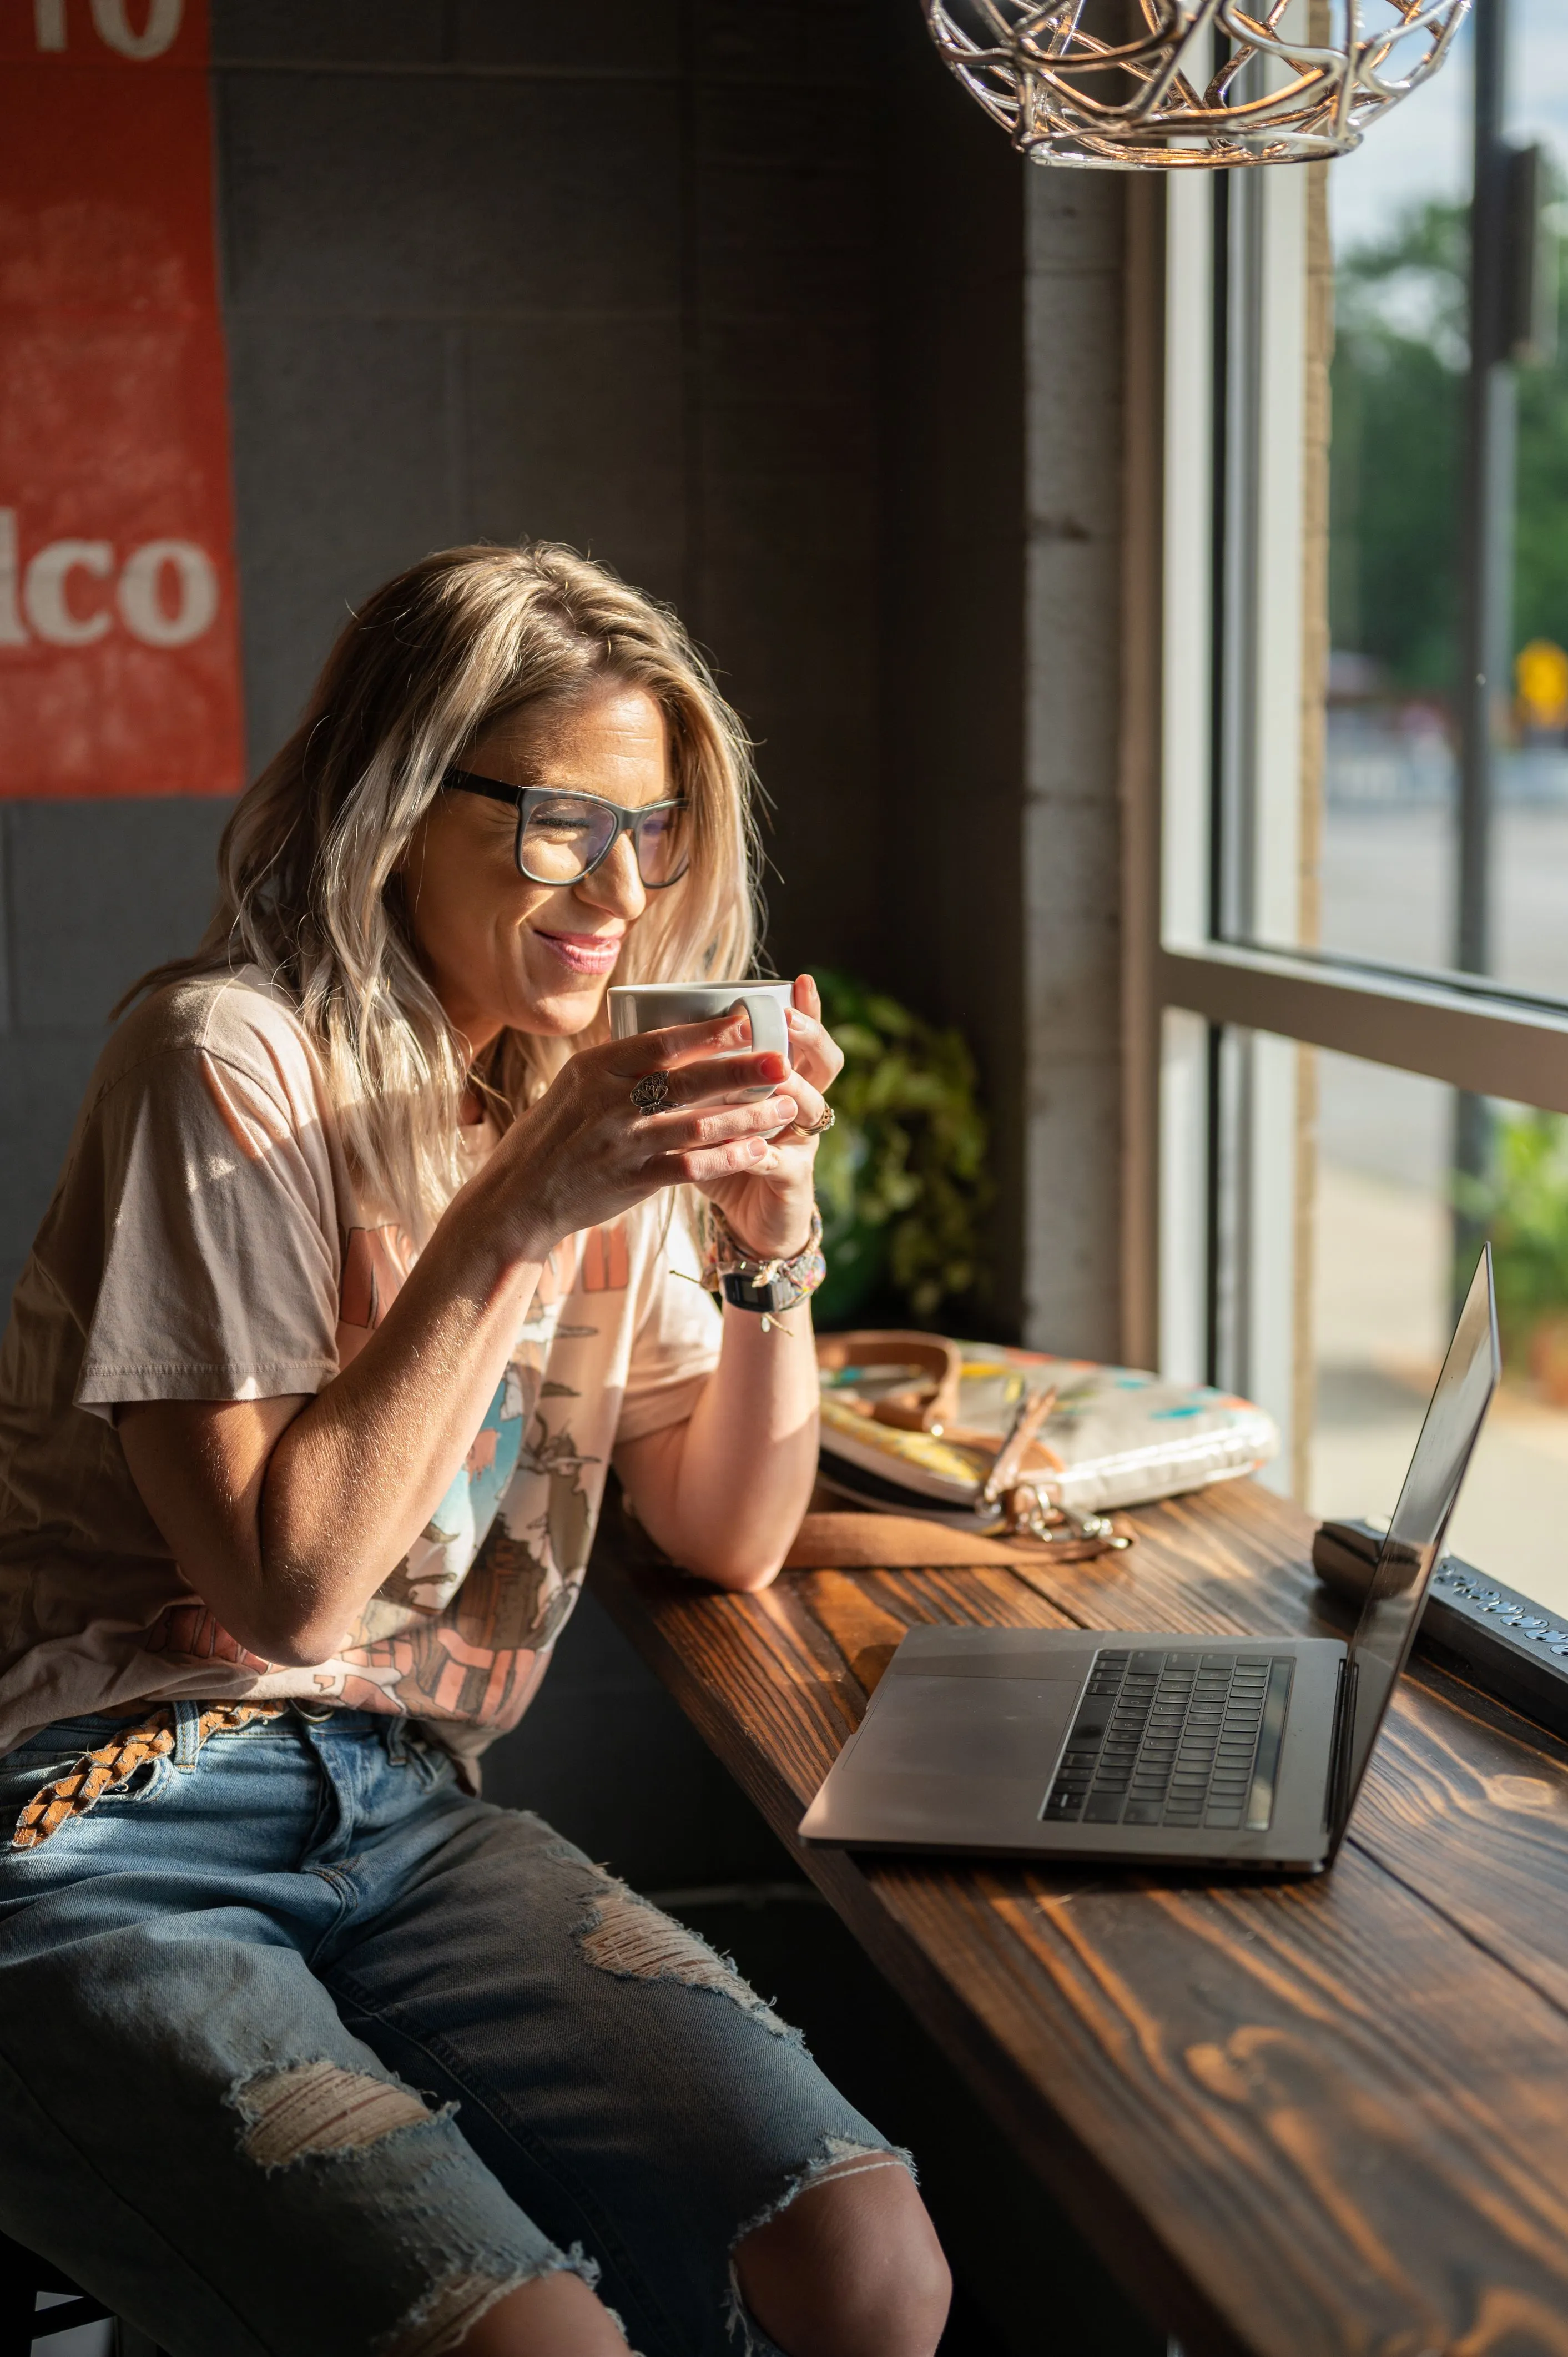 Woman smiling while holding a cup of coffee at a table with a laptop and personal items, in a sunlit cafe.